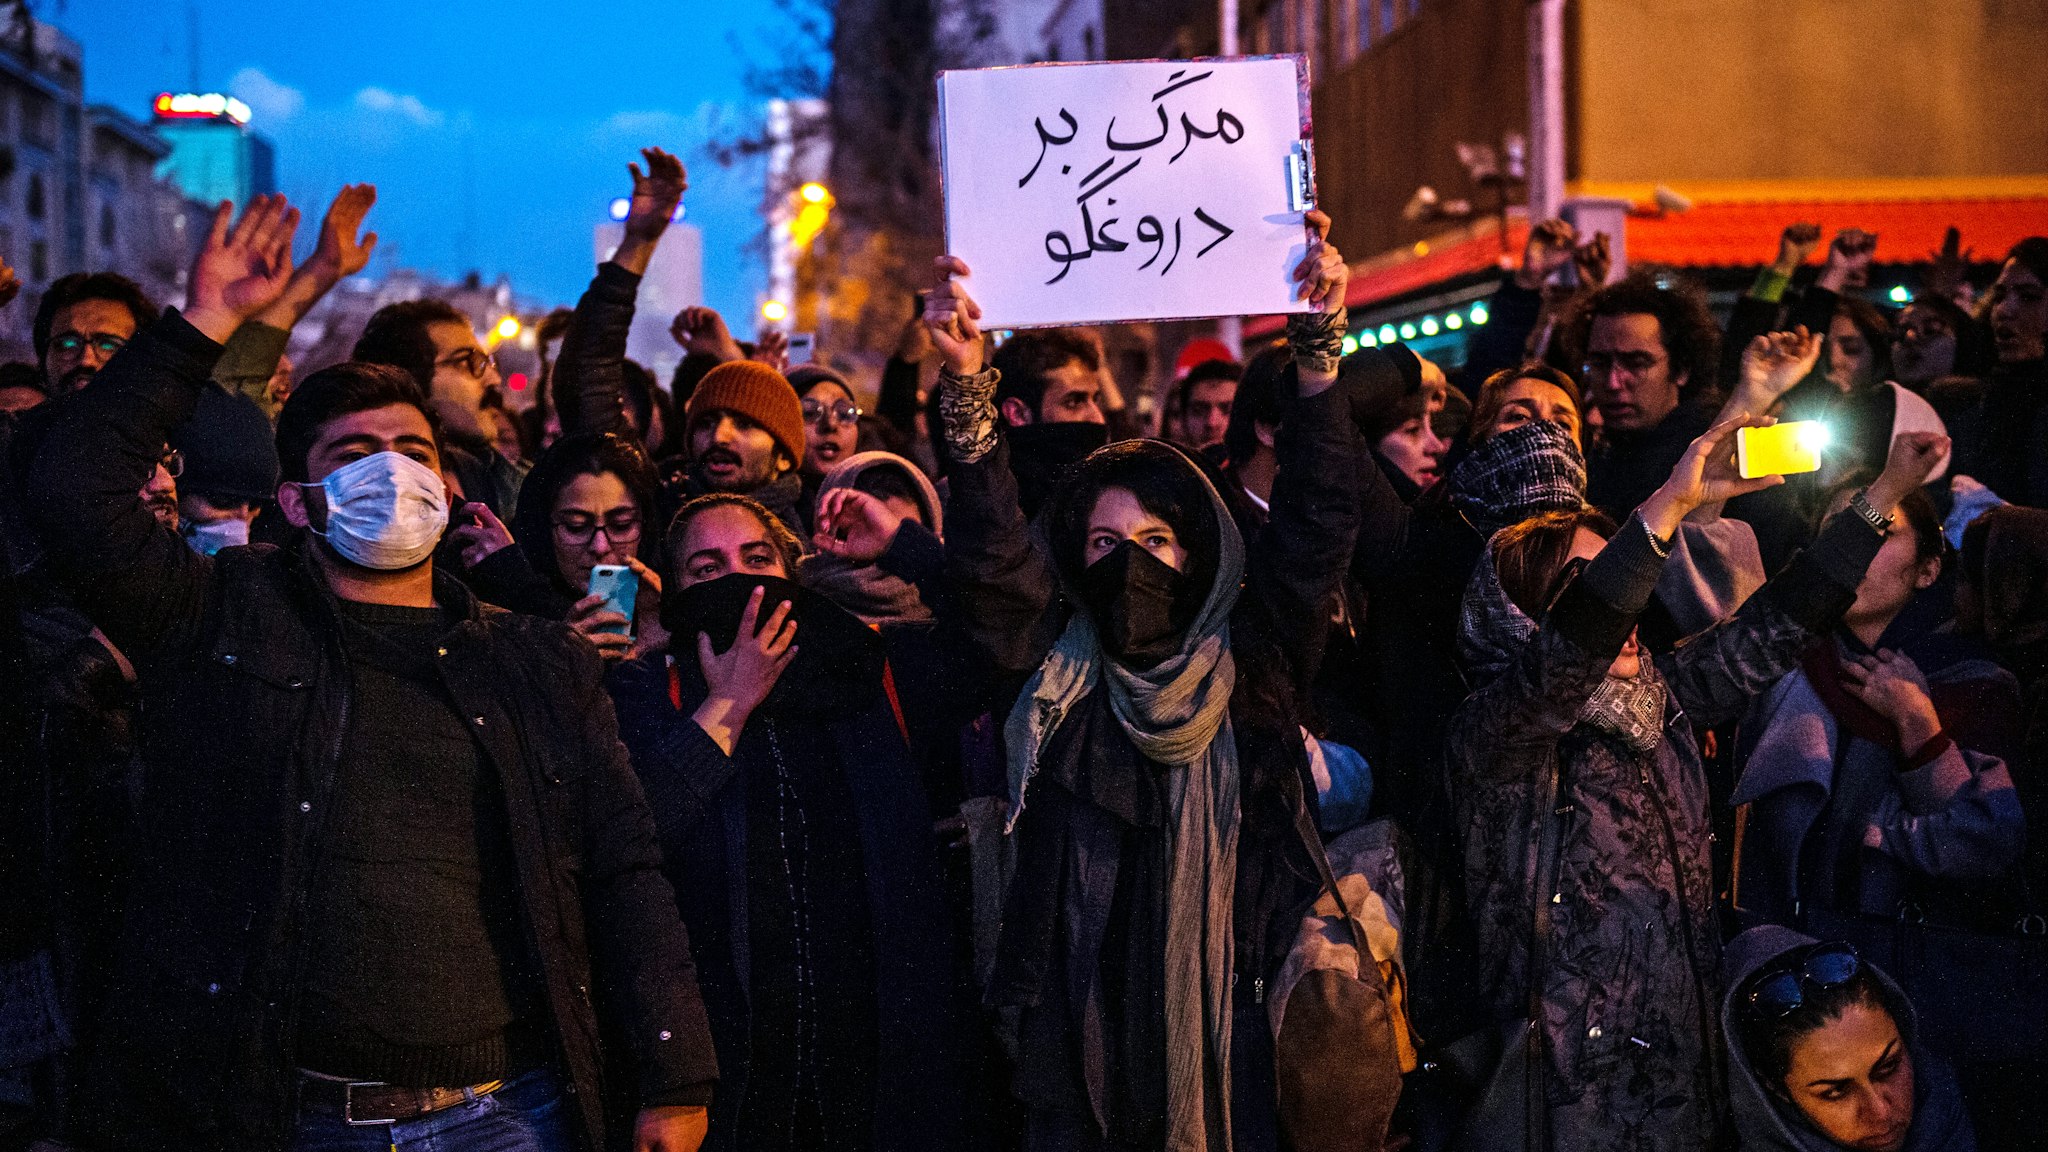 Demonstrators chant while gathering during a vigil for the victims of the Ukraine International Airlines flight that was unintentionally shot down by Iran, in Tehran, Iran, on Saturday, Jan. 11, 2019. Iran admitted it unintentionally shot down a Ukrainian jetliner that it mistook for a cruise missile, a dramatic reversal after days of denials that triggered international condemnation and protests in the streets of Tehran.